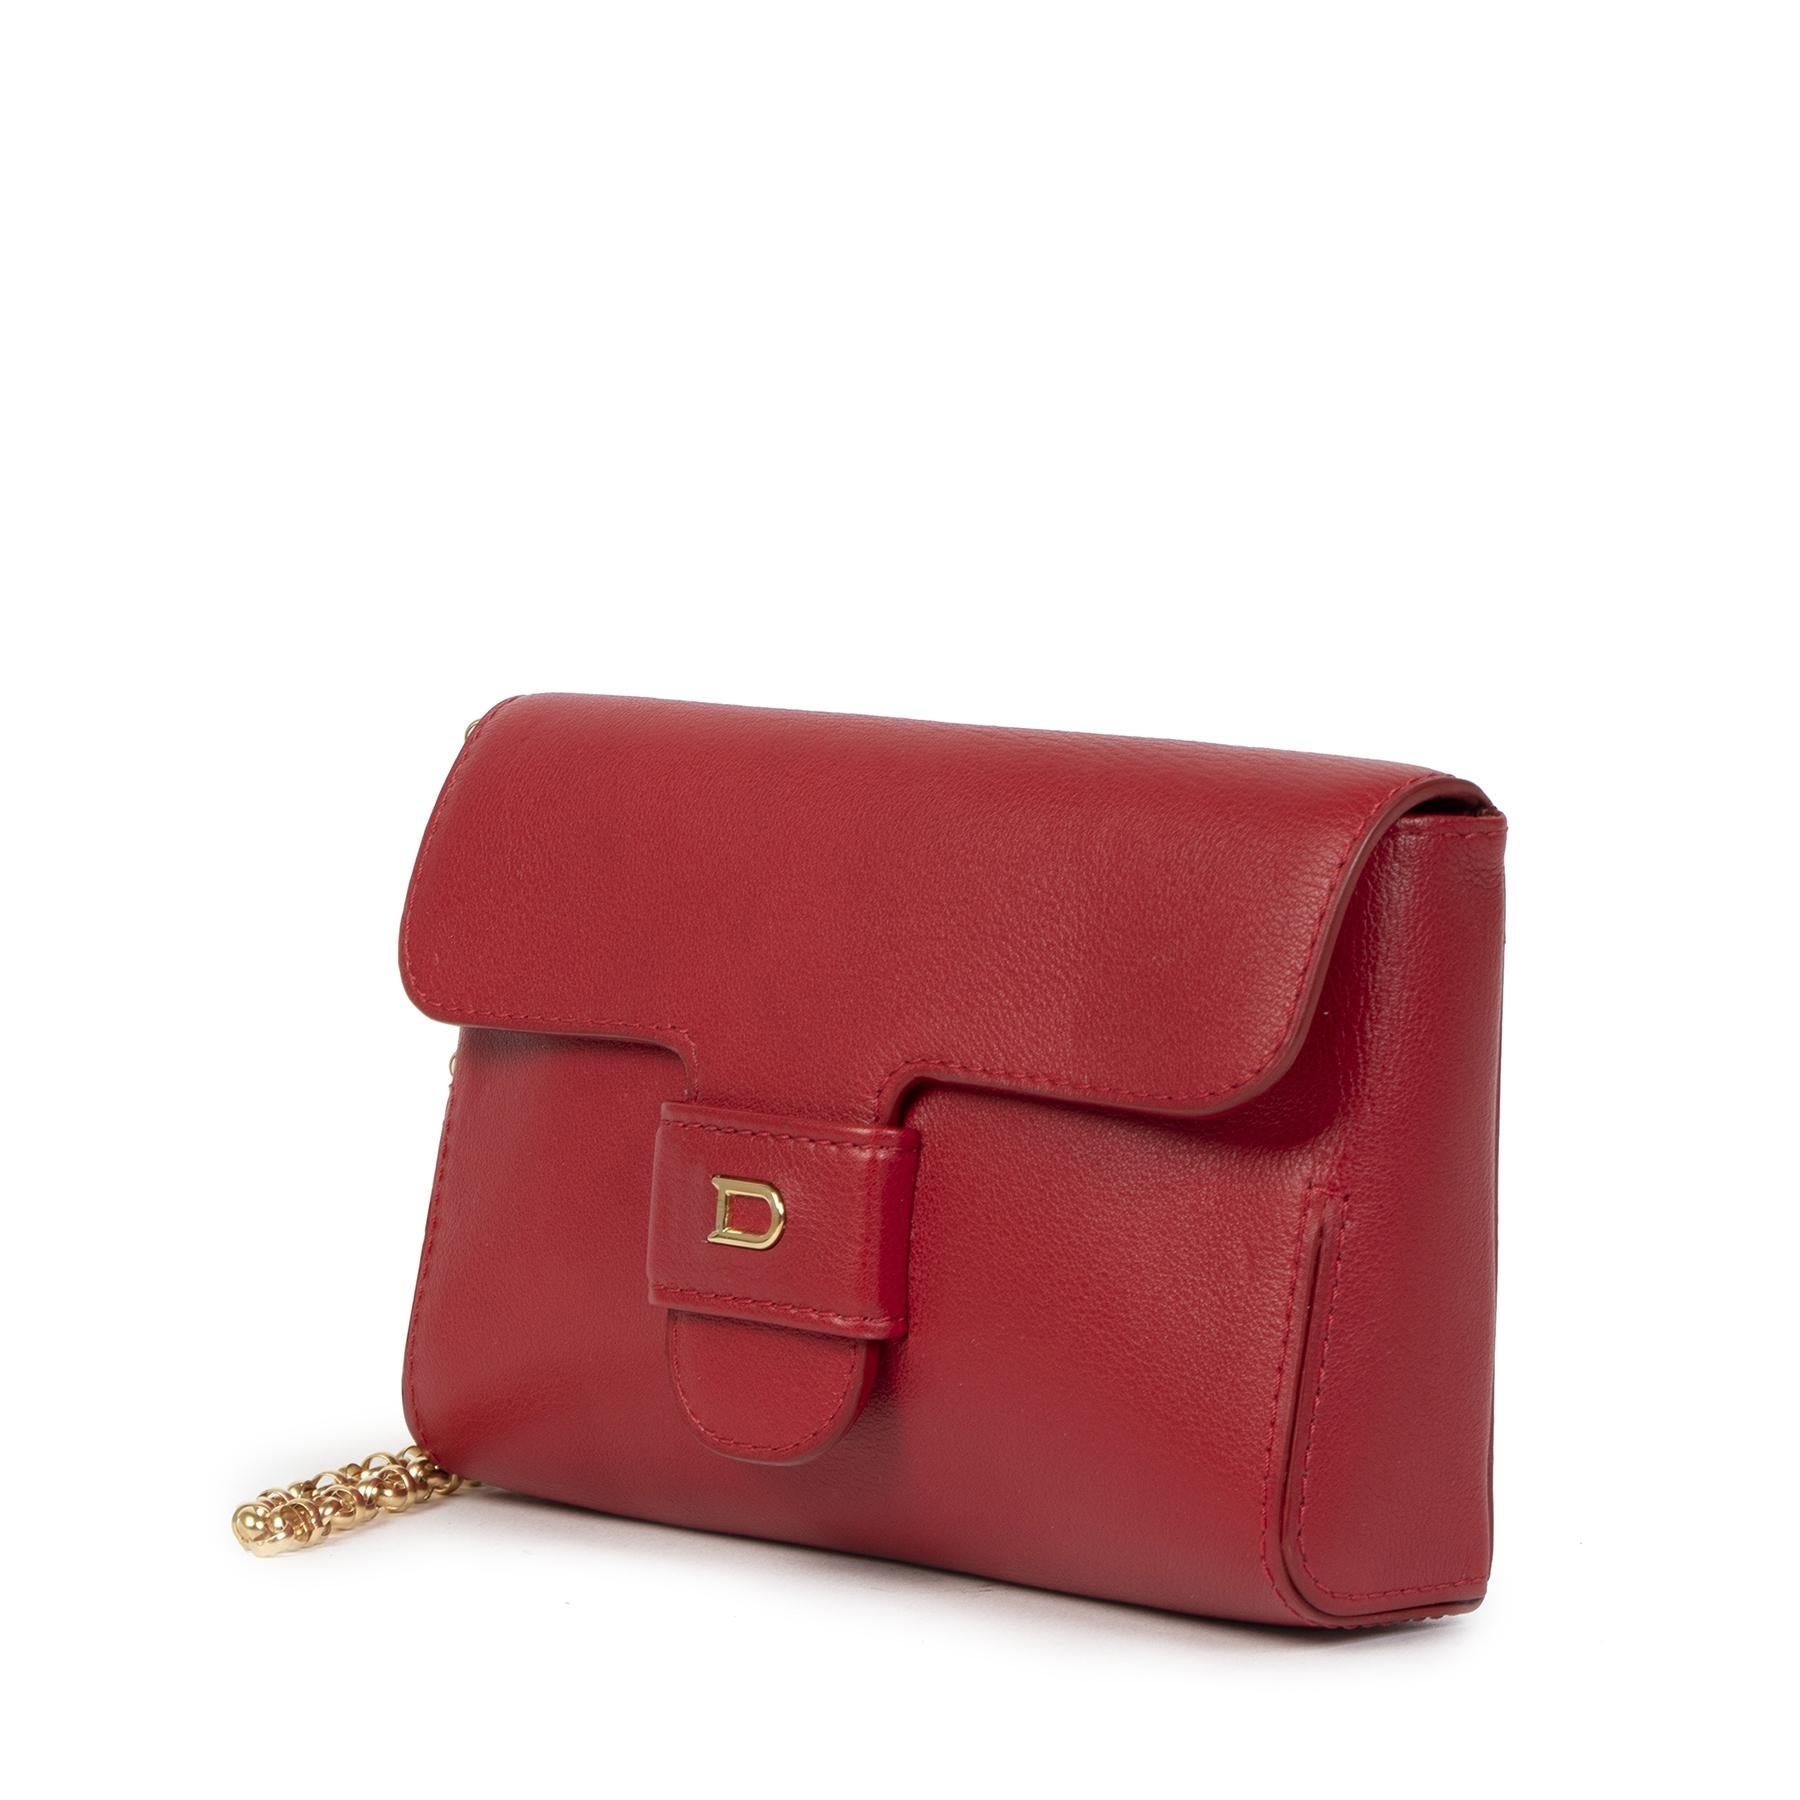 Good condition

Delvaux Red Chain Evening Bag

Elevate your evening looks for any occasion with this red Delvaux mini bag. This gorgeous clutch bag is the perfect purse for a fancy night out and will add a great pop of color to any ensemble. The